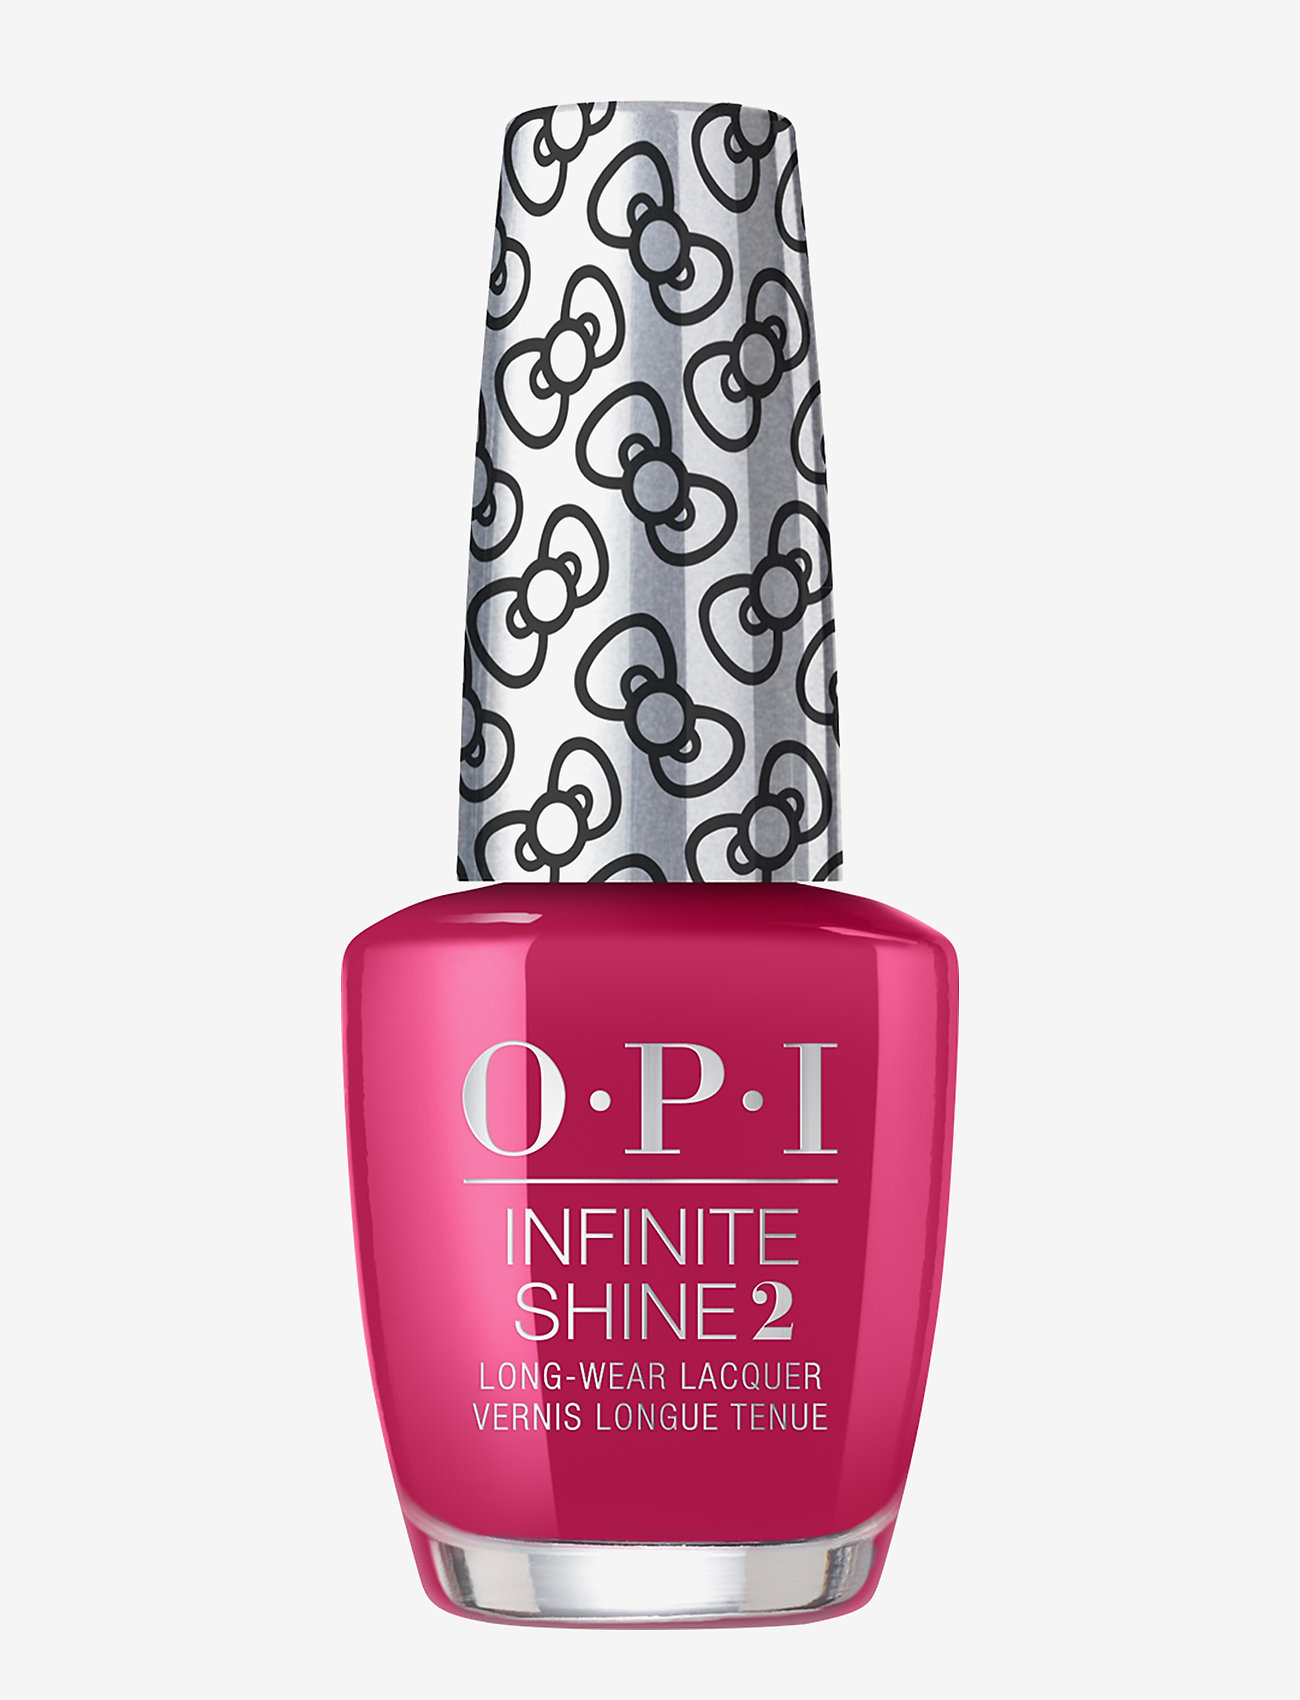 OPI - ALL ABOUT THE BOWS - nagellack - all about the bows - 0